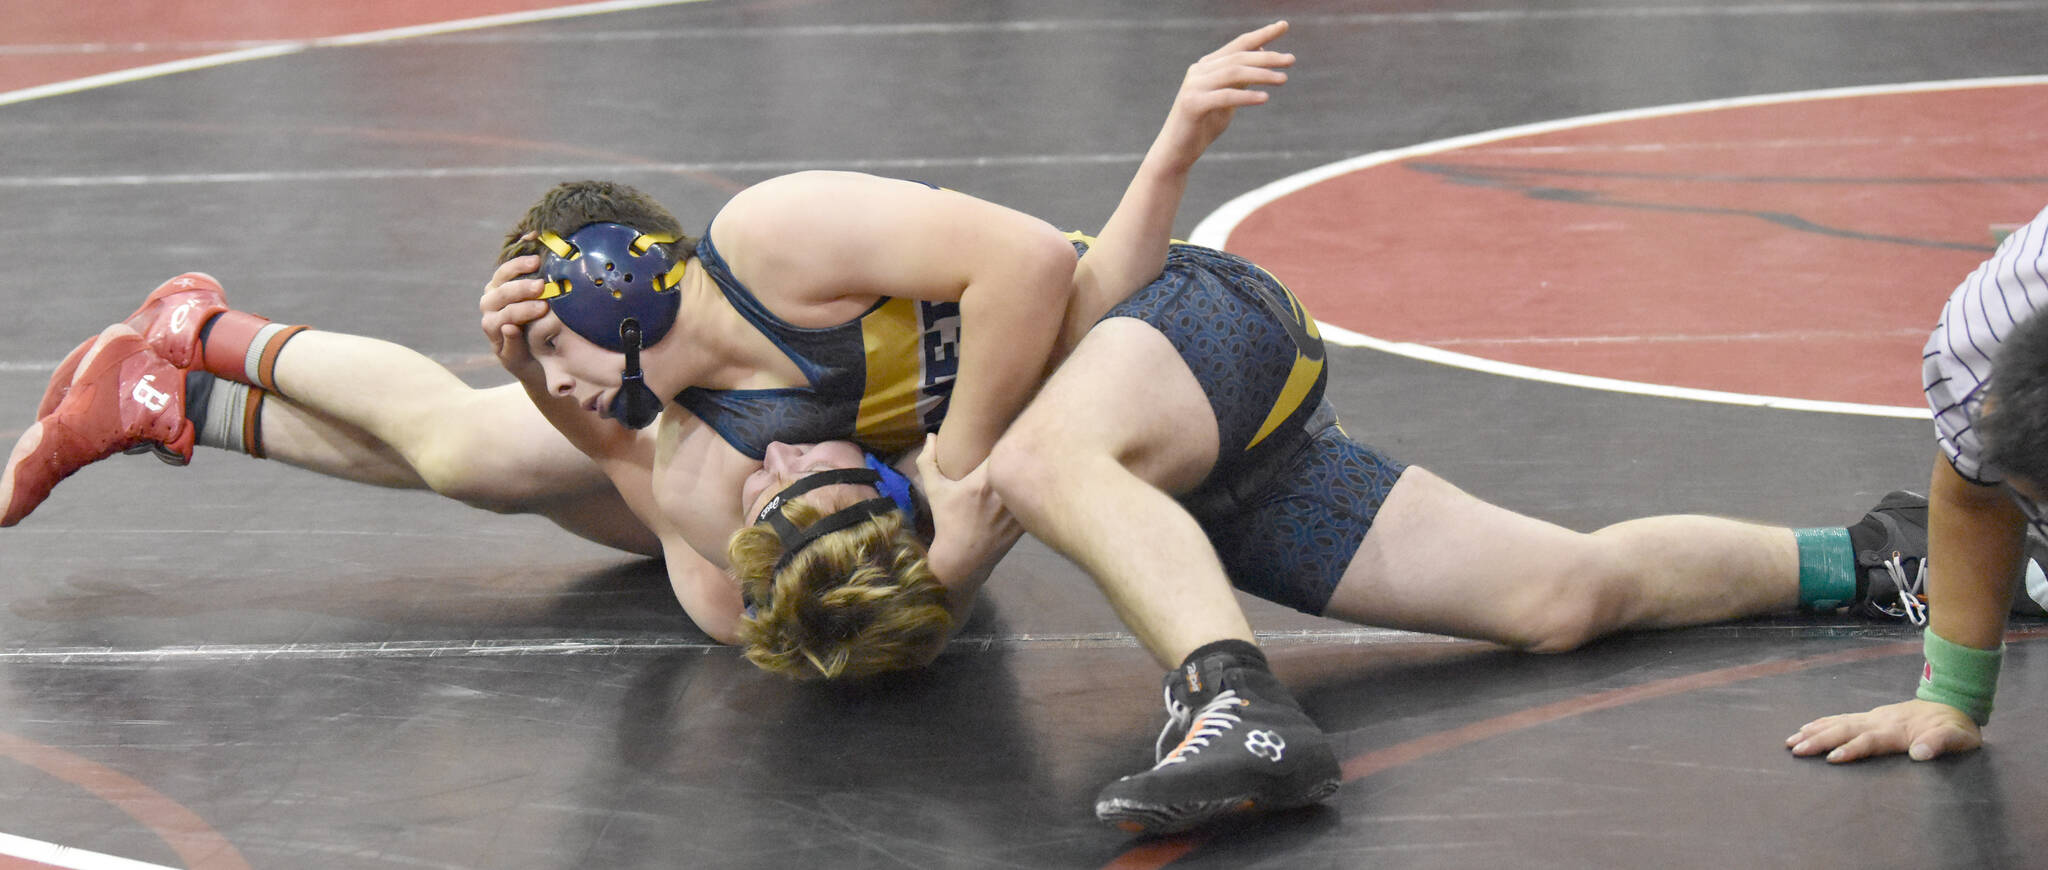 Homer’s Brayden Woods wrestles with Soldotna’s Liam Boyd at 160 pounds at the Luke Spruill Memorial Tournament on Saturday, Oct. 22, 2022, at Kenai Central High School in Kenai, Alaska. Woods was able to pin Boyd. (Photo by Jeff Helminiak/Peninsula Clarion)